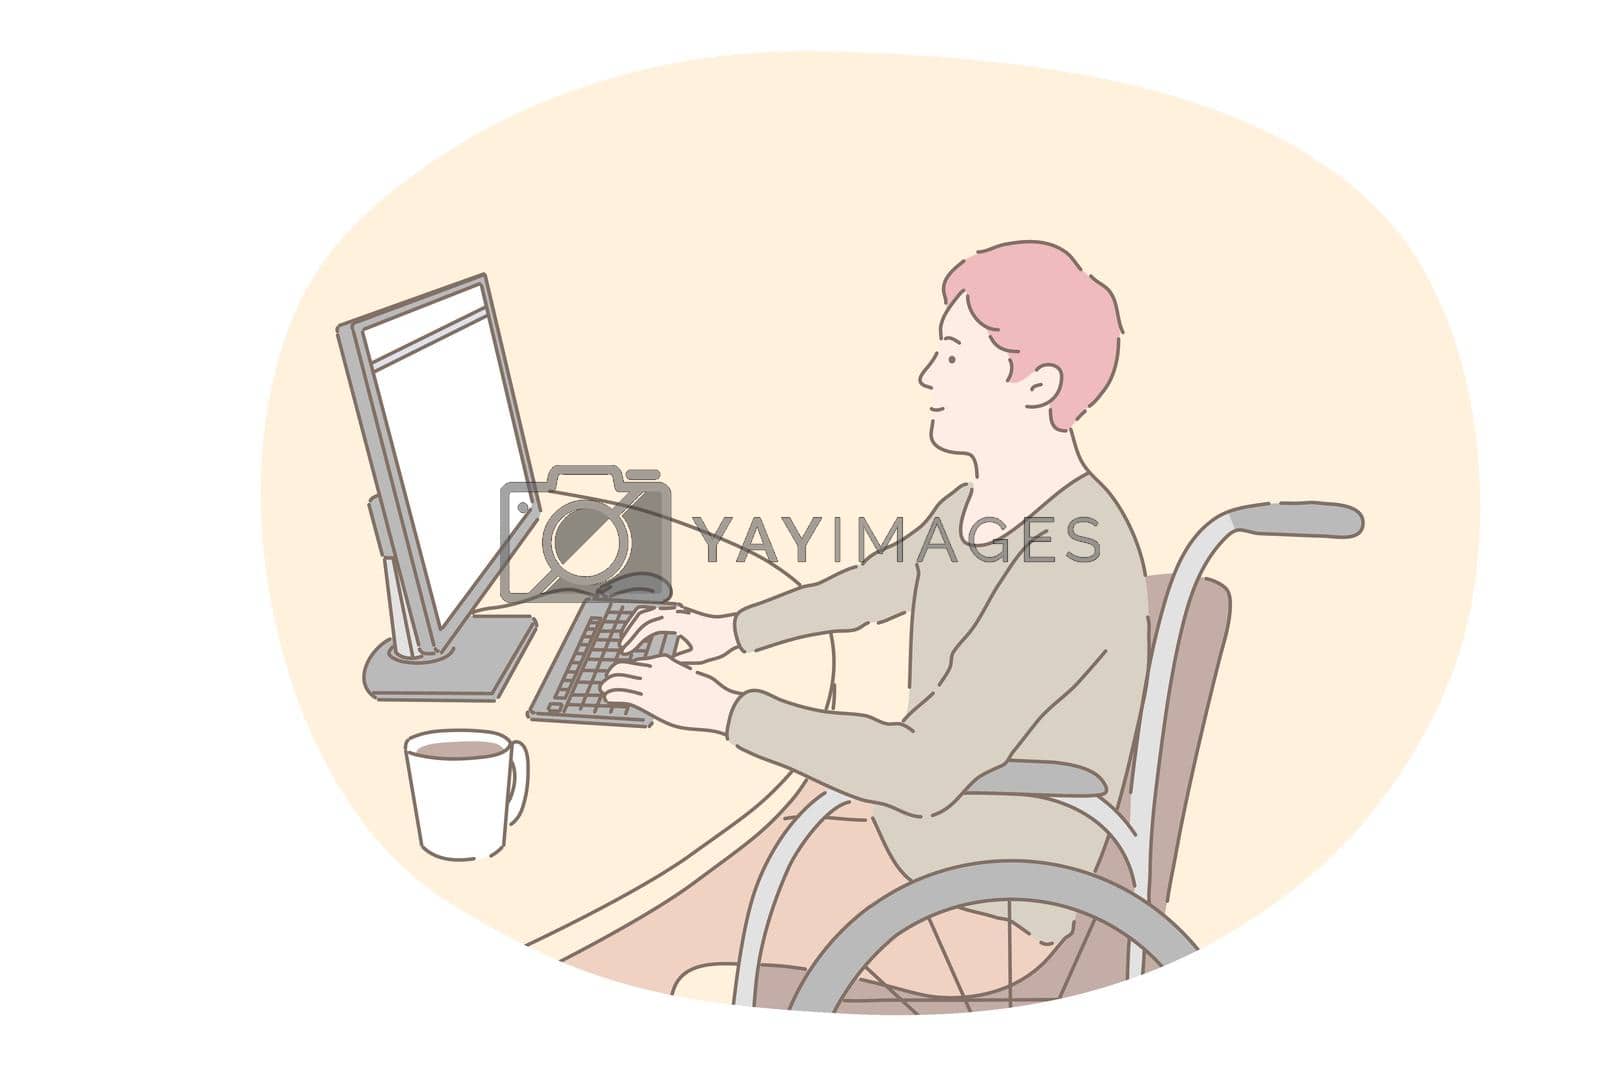 Royalty free image of Disabled people on wheelchair living happy active lifestyle concept by VECTORIUM